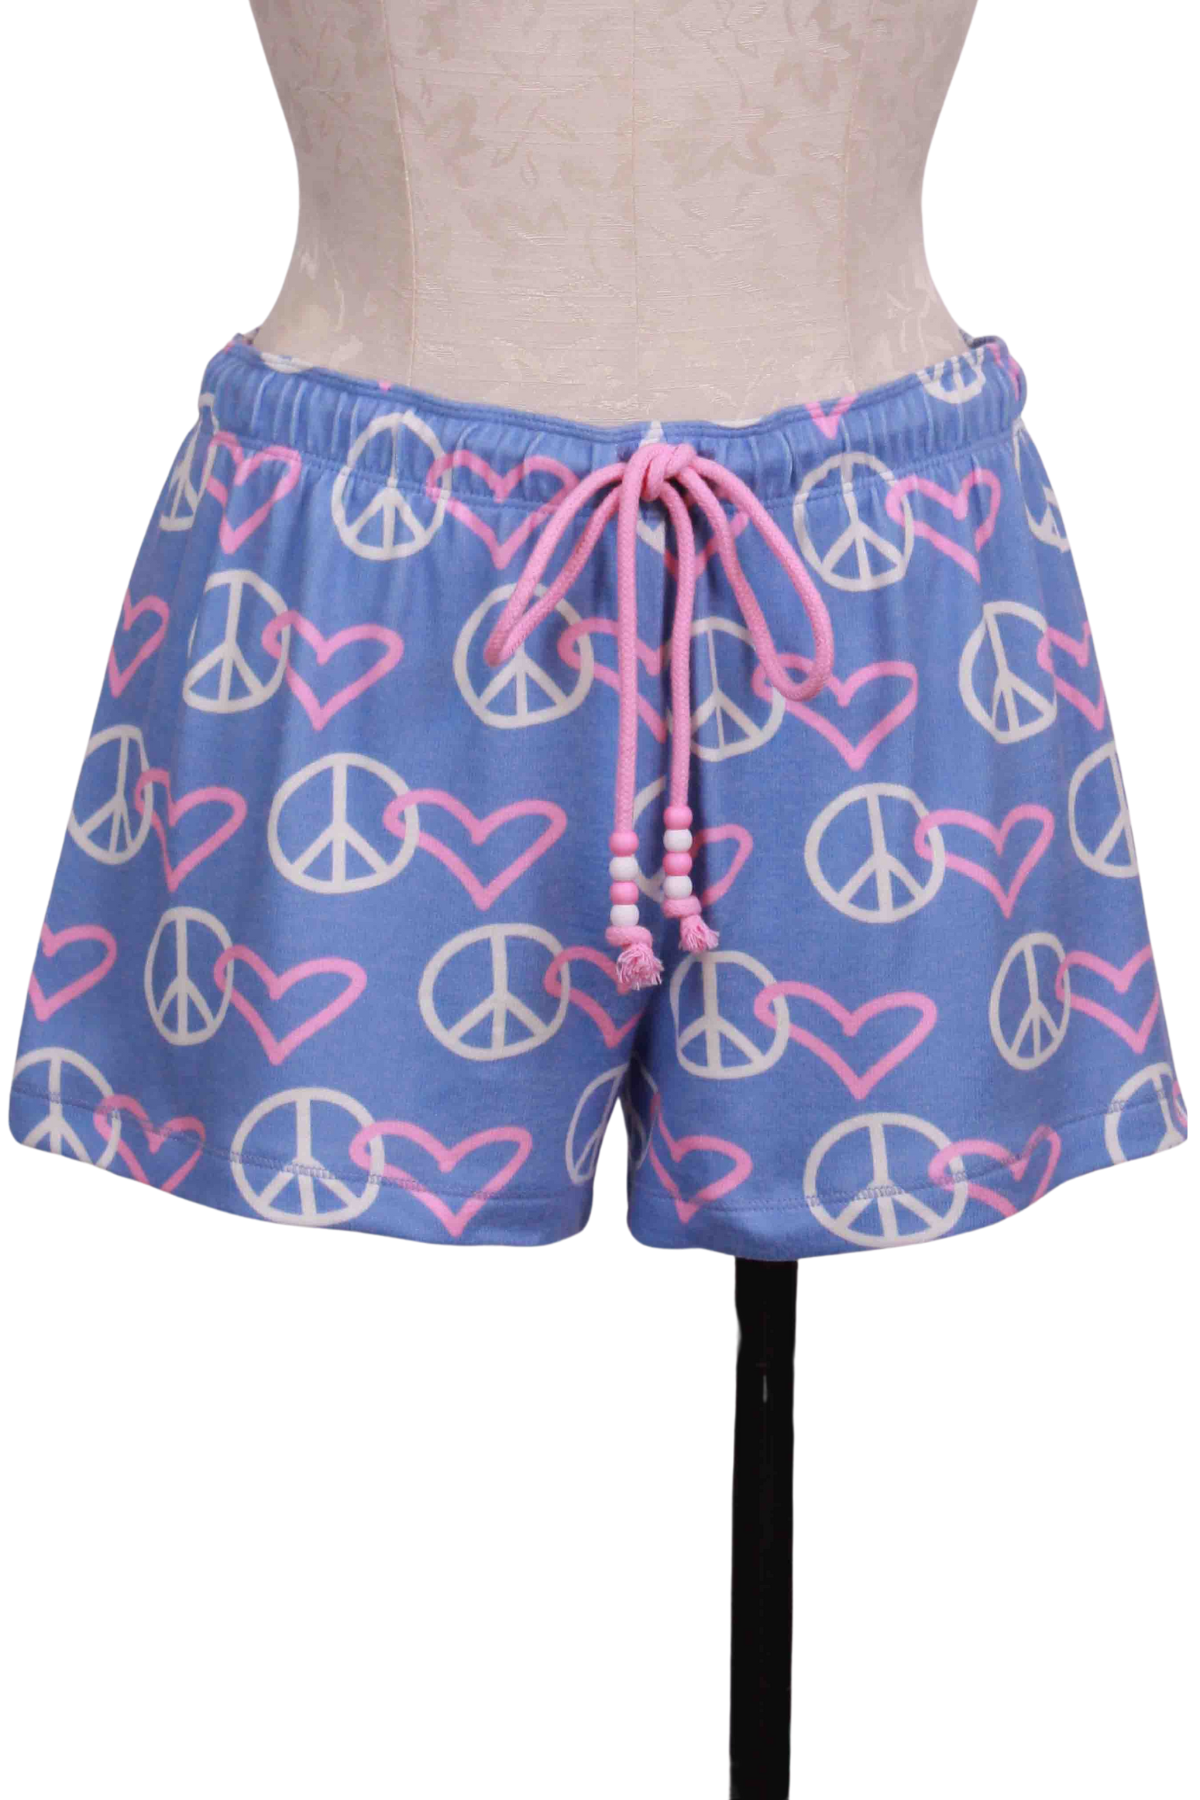 Peace Love Shorts by PJ Salvage